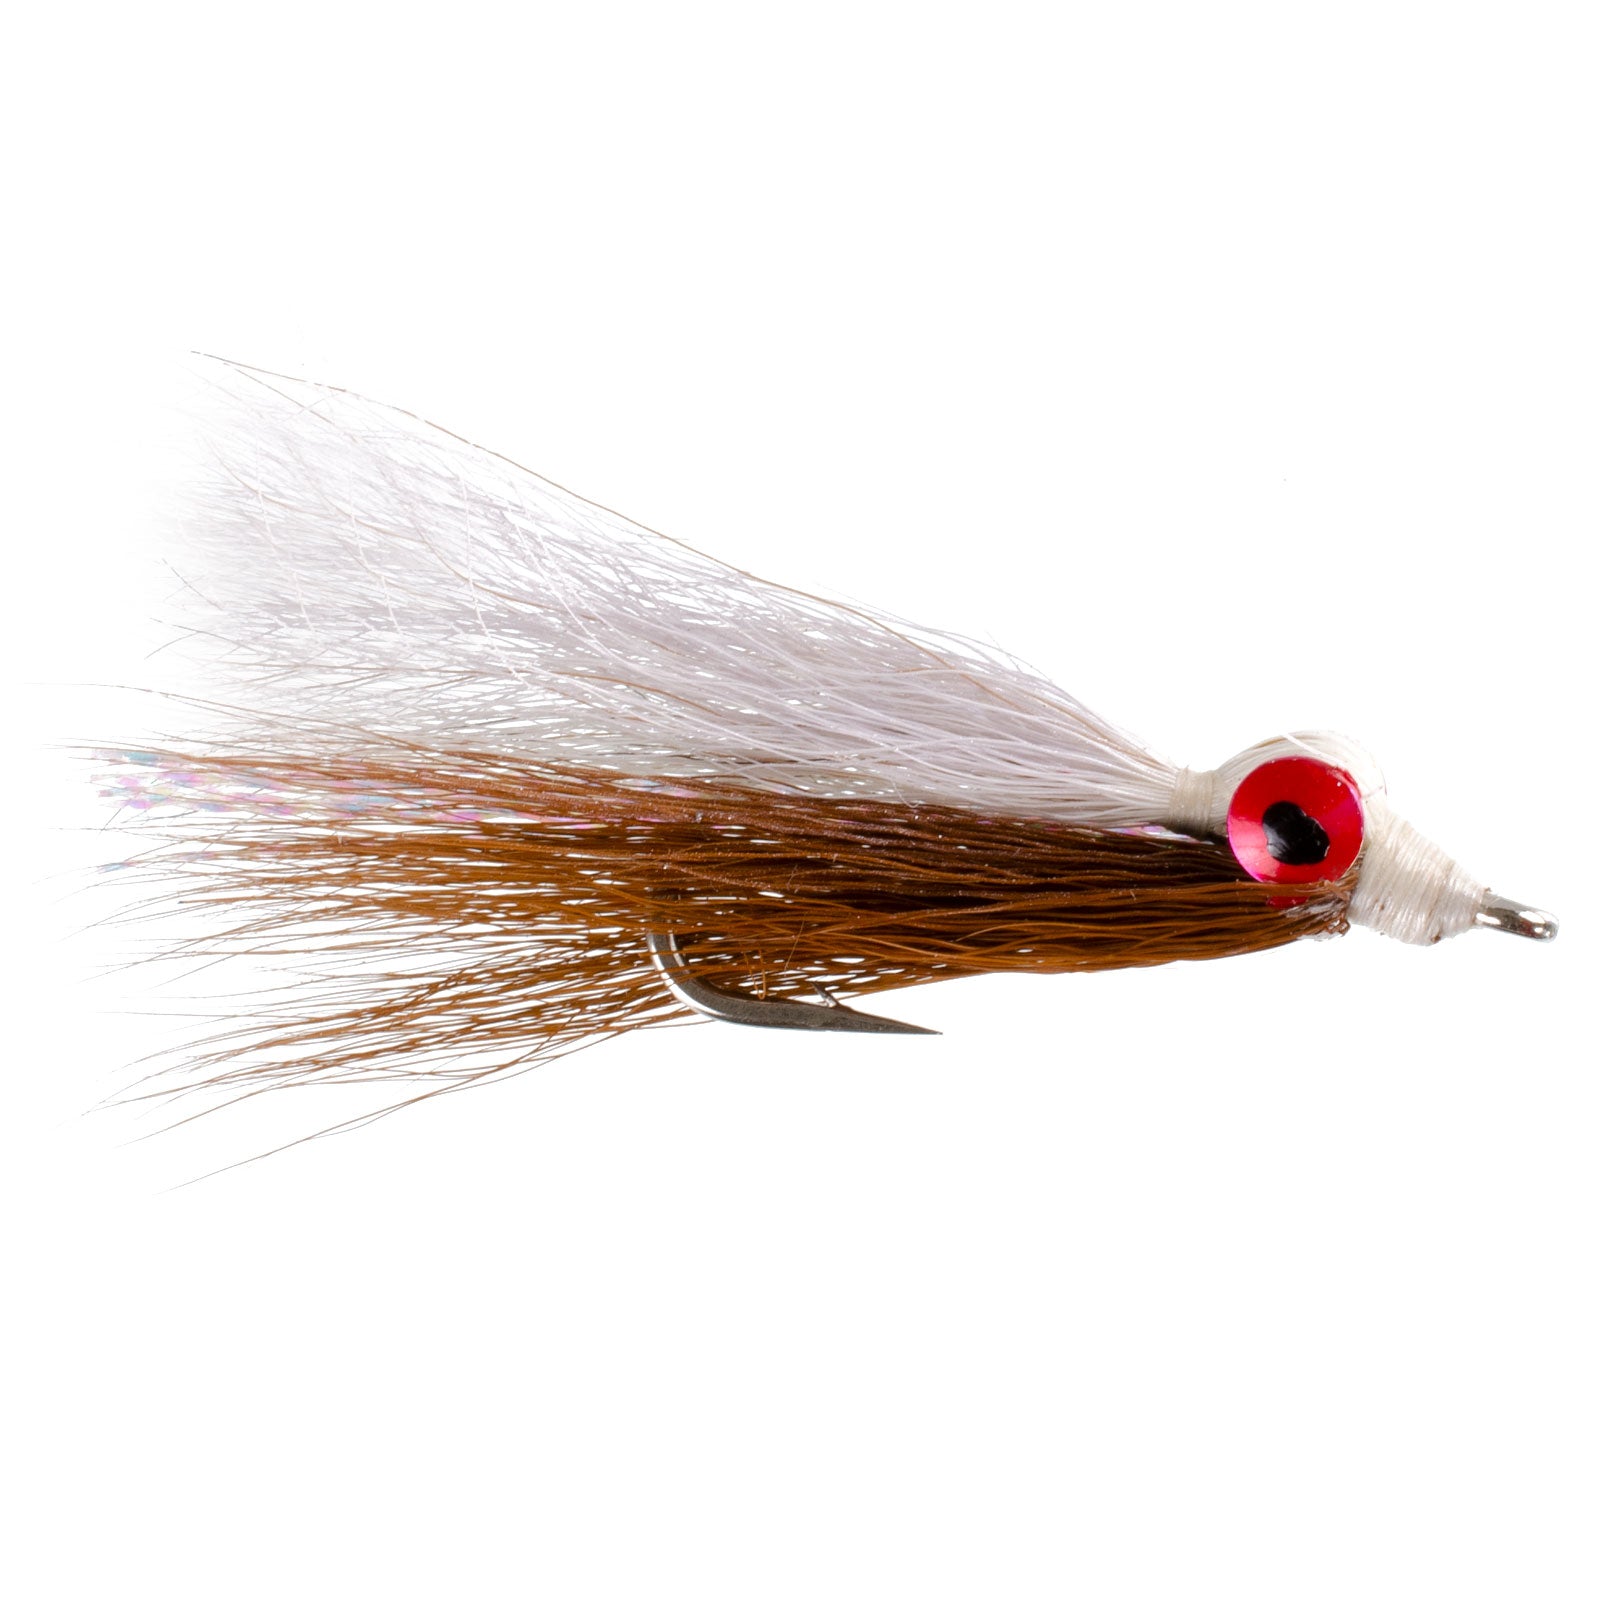 Clousers Deep Minnow Brown White - Streamer Fly Fishing Flies - 4 Saltwater and Bass Flies - Hook Size 1/0